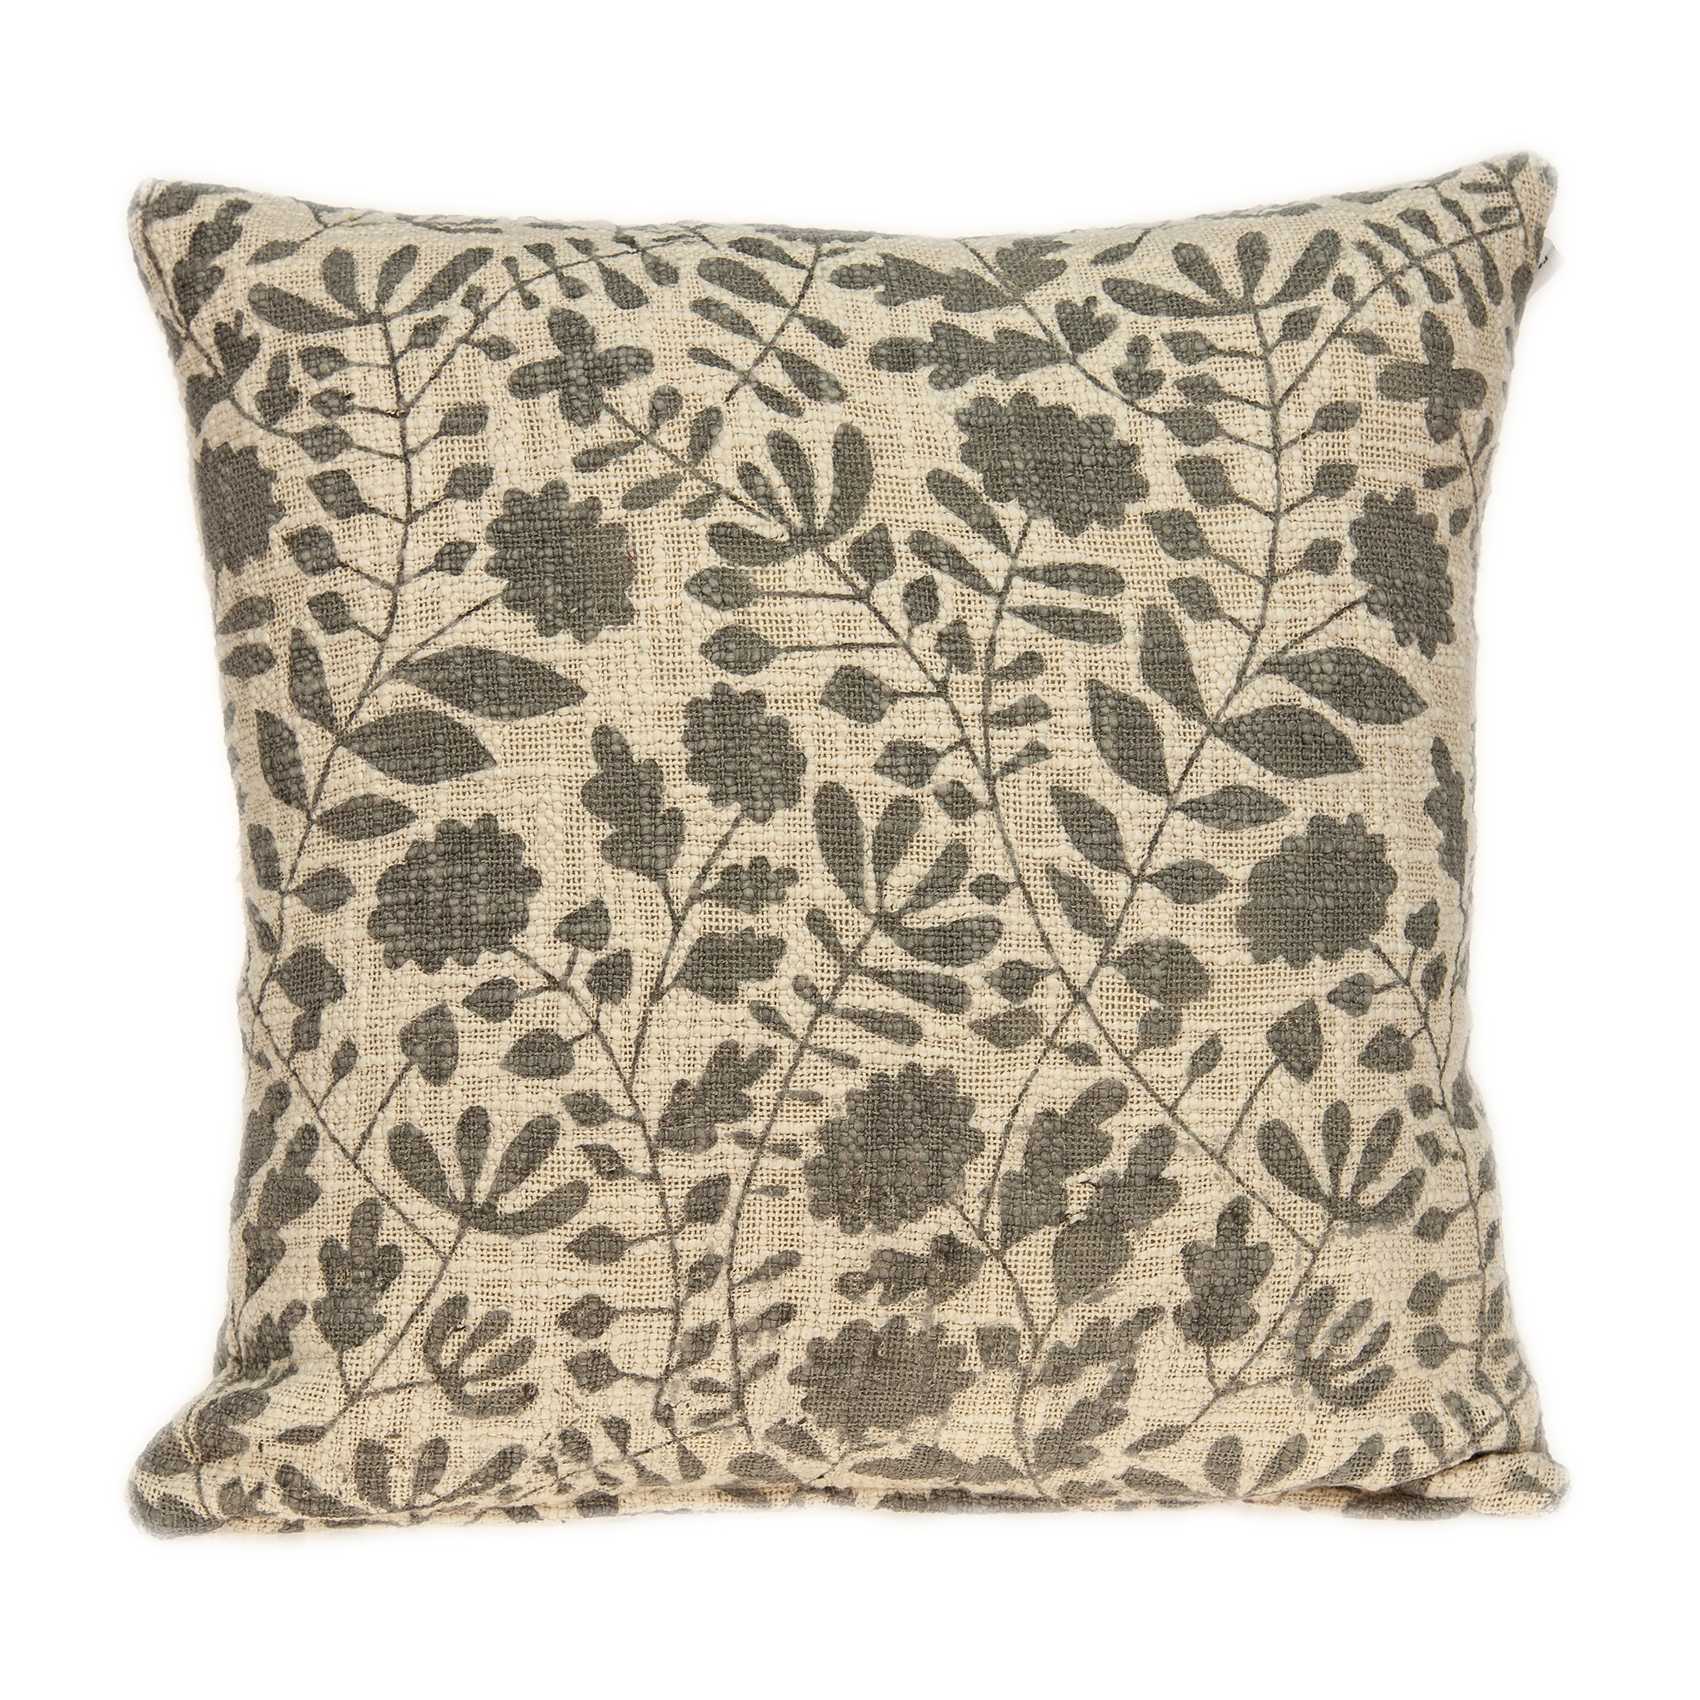 18" x 7" x 18" Transitional Beige Floral Print Pillow Cover With Poly Insert